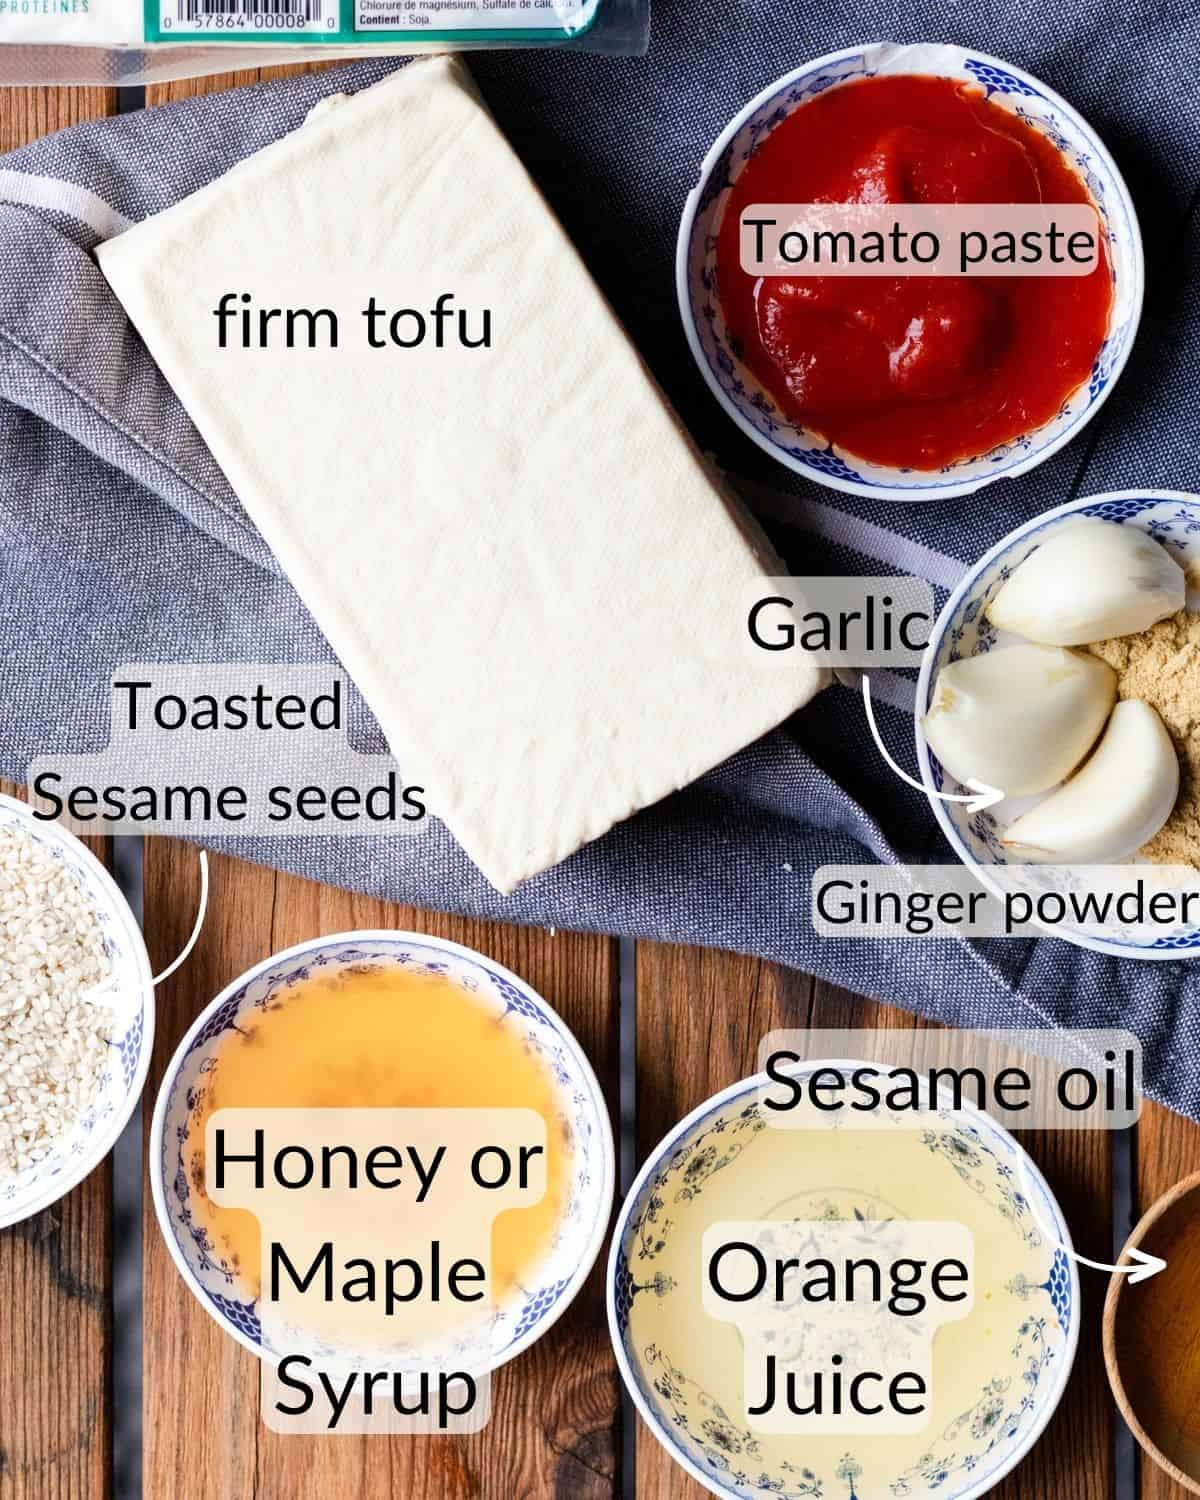 Make Ahead: This Sticky Orange Tofu recipe is perfect for making ahead. You can prepare the tofu and sauce in advance, then simply heat it up when you're ready to serve. It's a great way to have a delicious meal on hand for busy days.